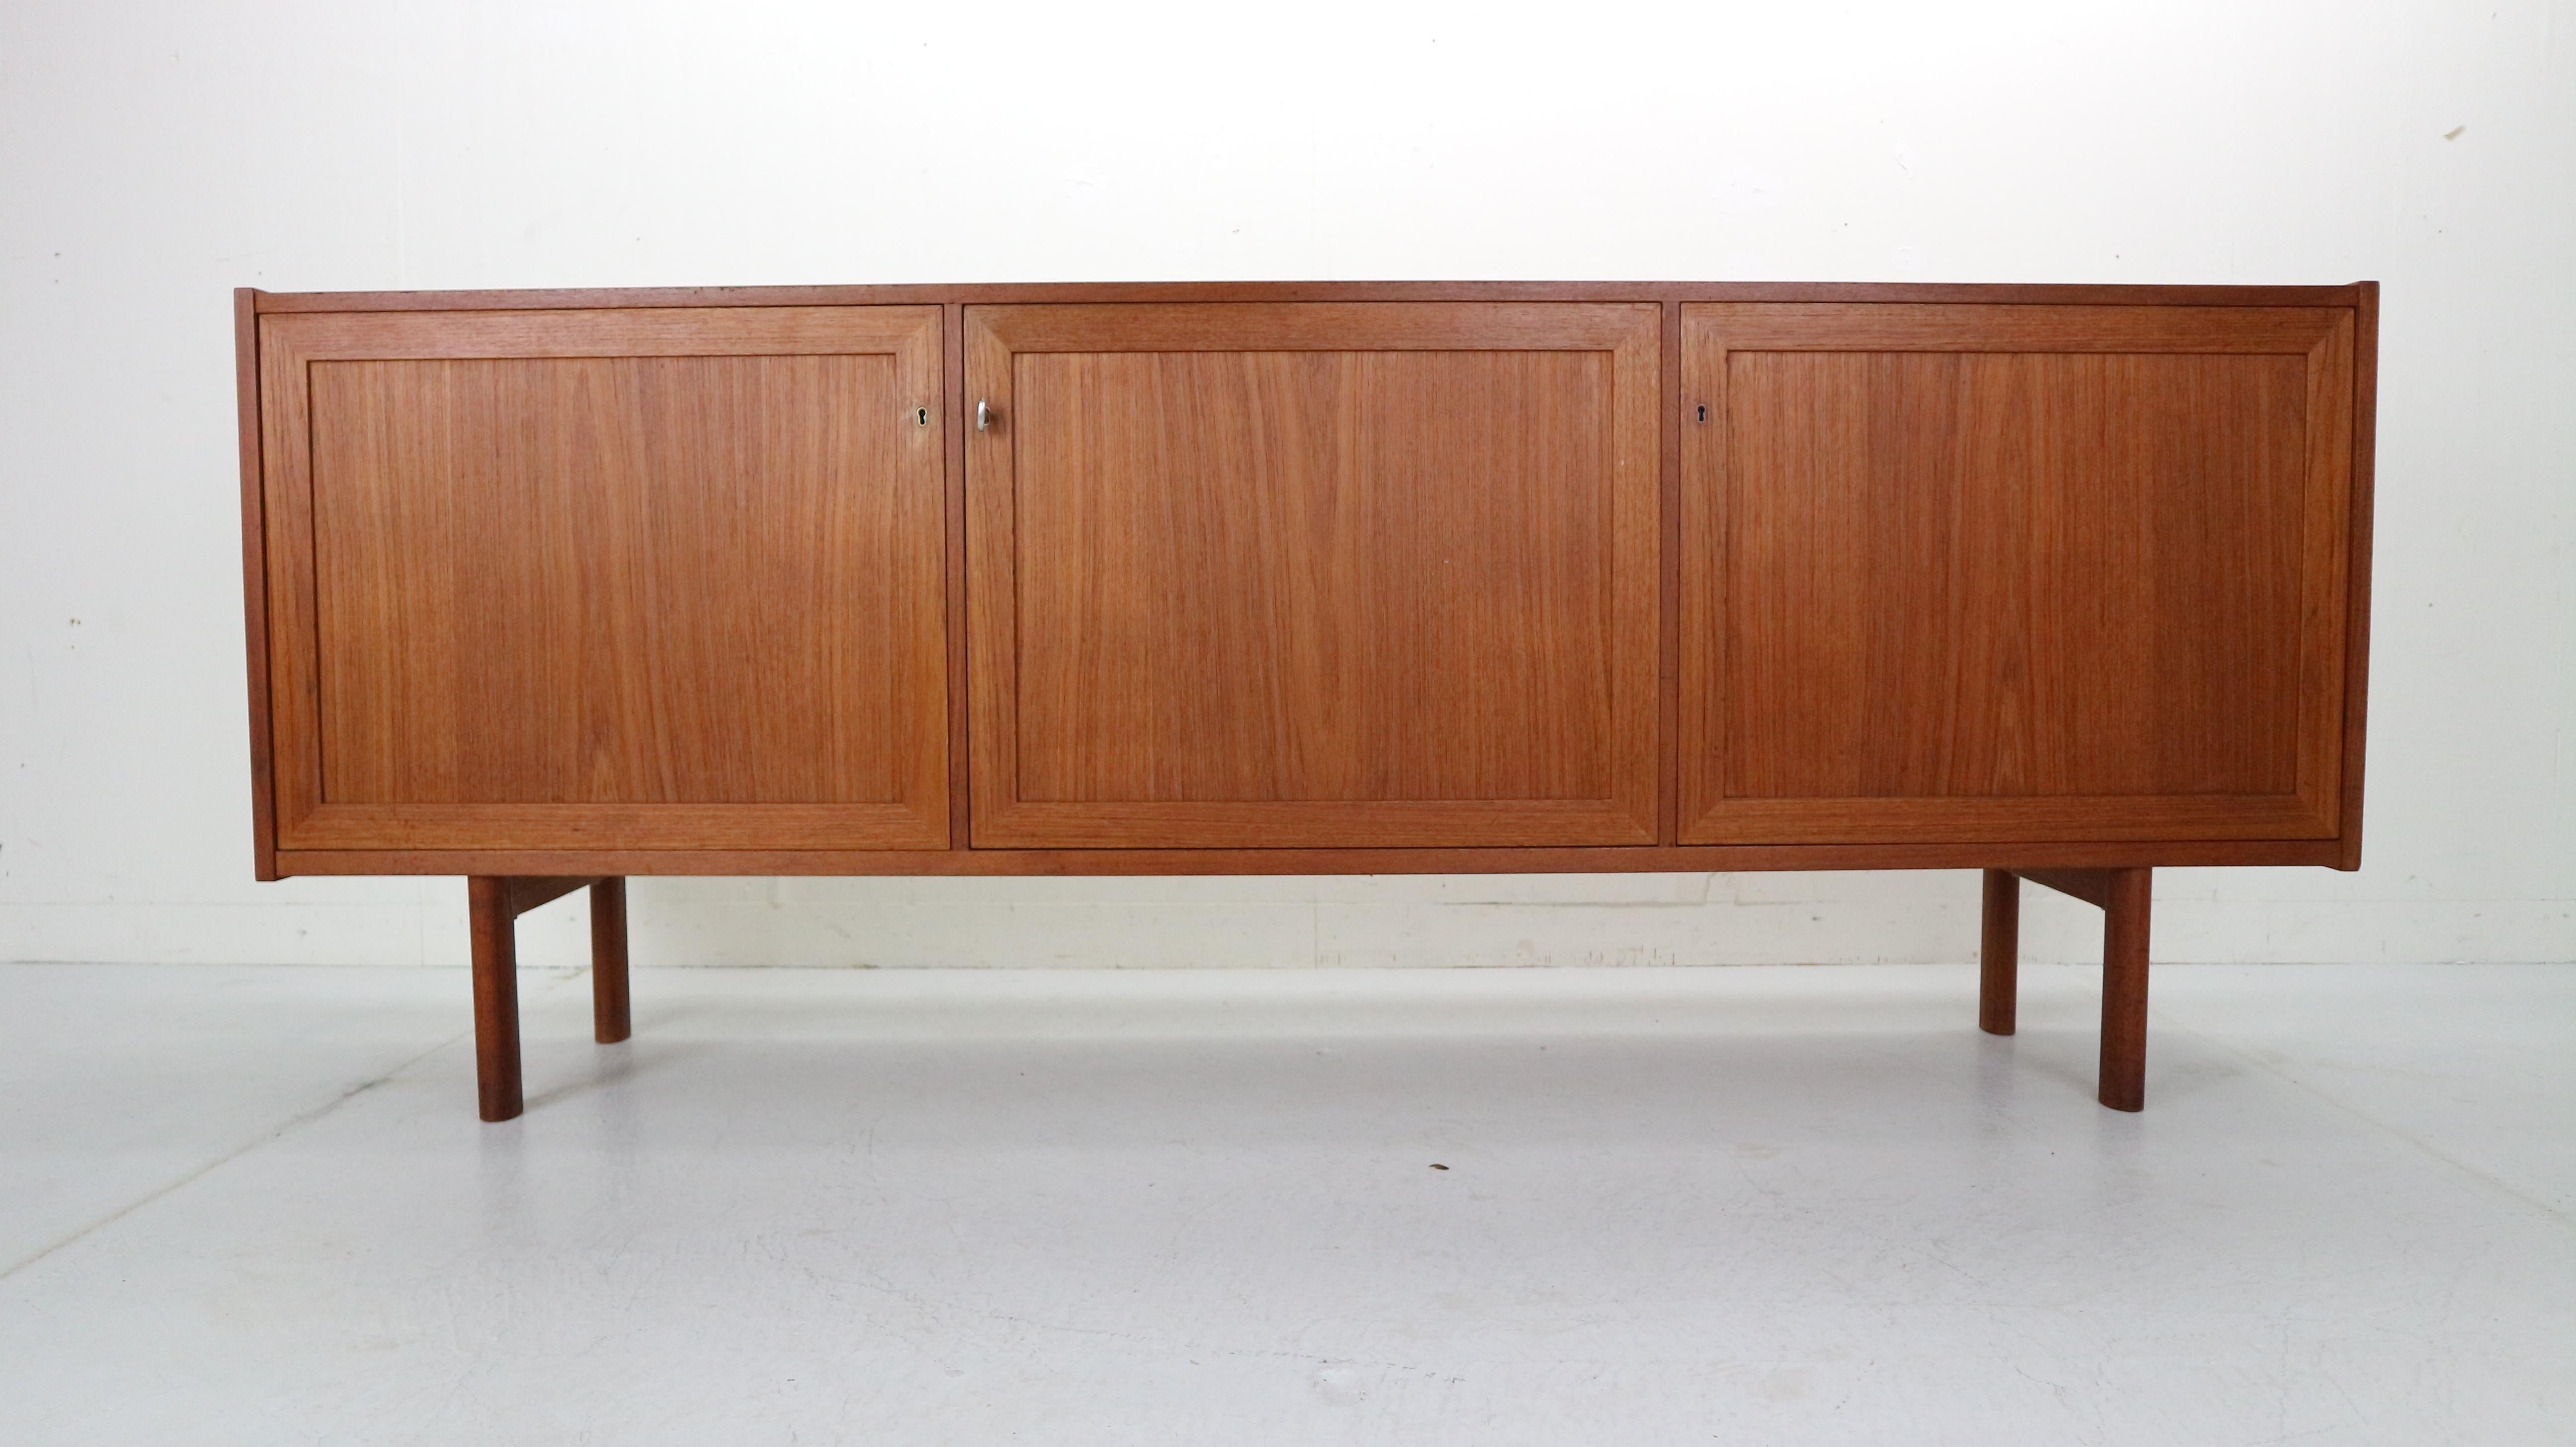 Beautifully minimalistic Danish design sideboard made in 1970s, Denmark.
It's made of teak wood and has an original key and three locks from all of the sides.
201cm long sideboard has plenty storage for your items and unique accent for your